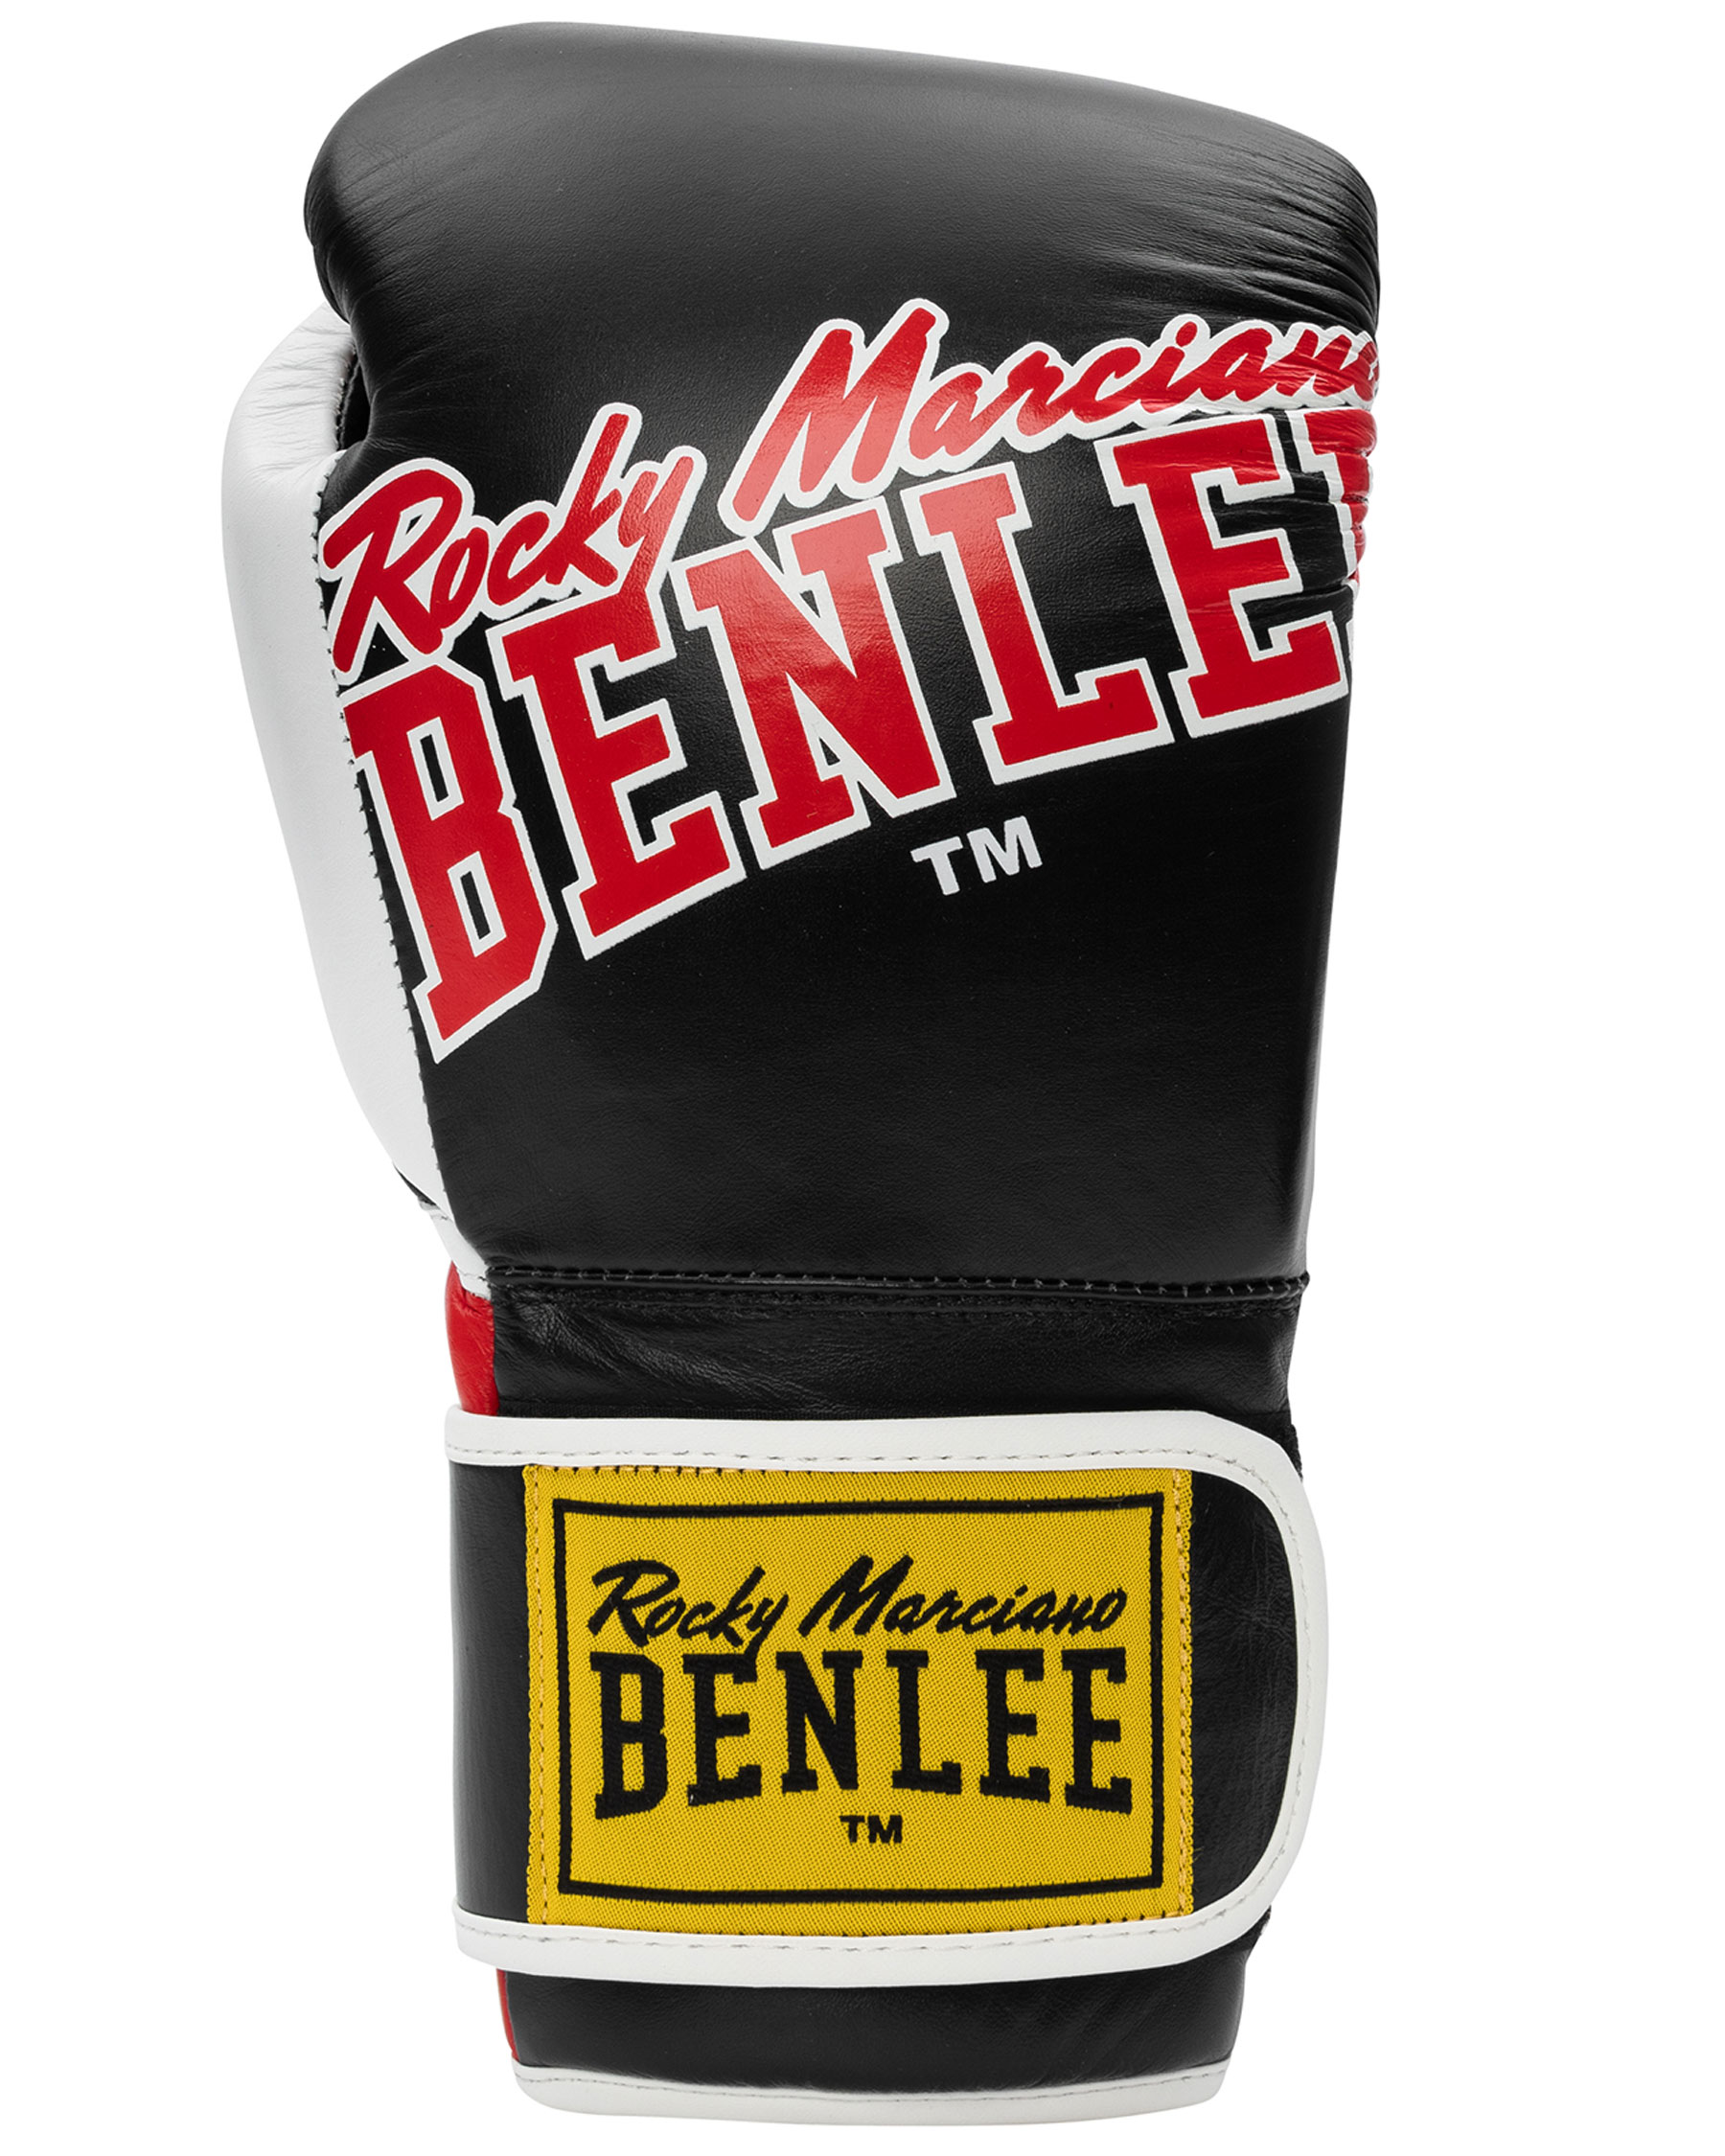 BenLee boxing glove Madison Deluxe - Boxing gloves, training gloves and  sparring gloves - BenLee sportswear and boxing equipment